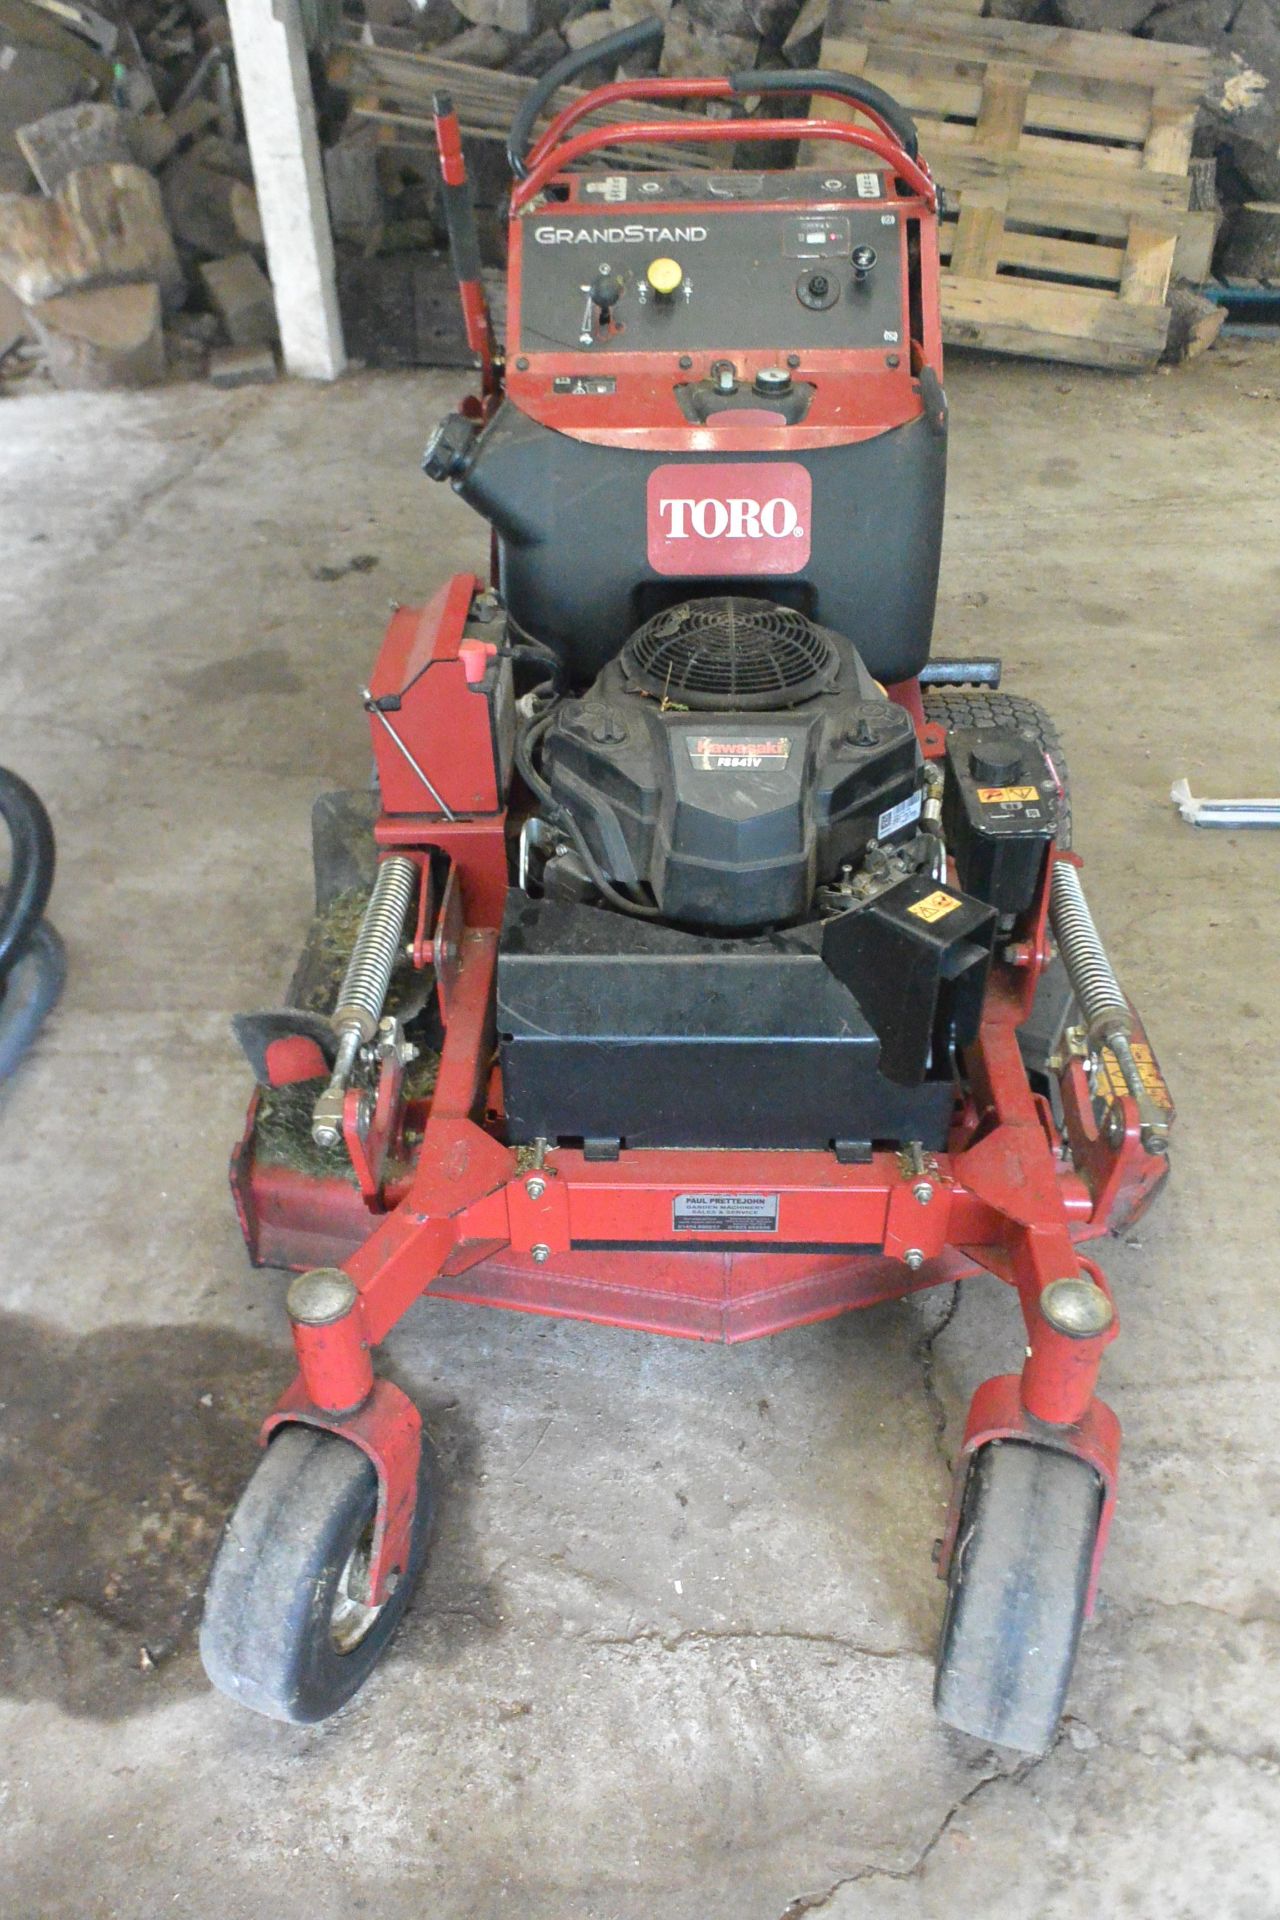 Toro compact grandstand turbo 40" stand-on side discharge mower (2018) - Image 3 of 7